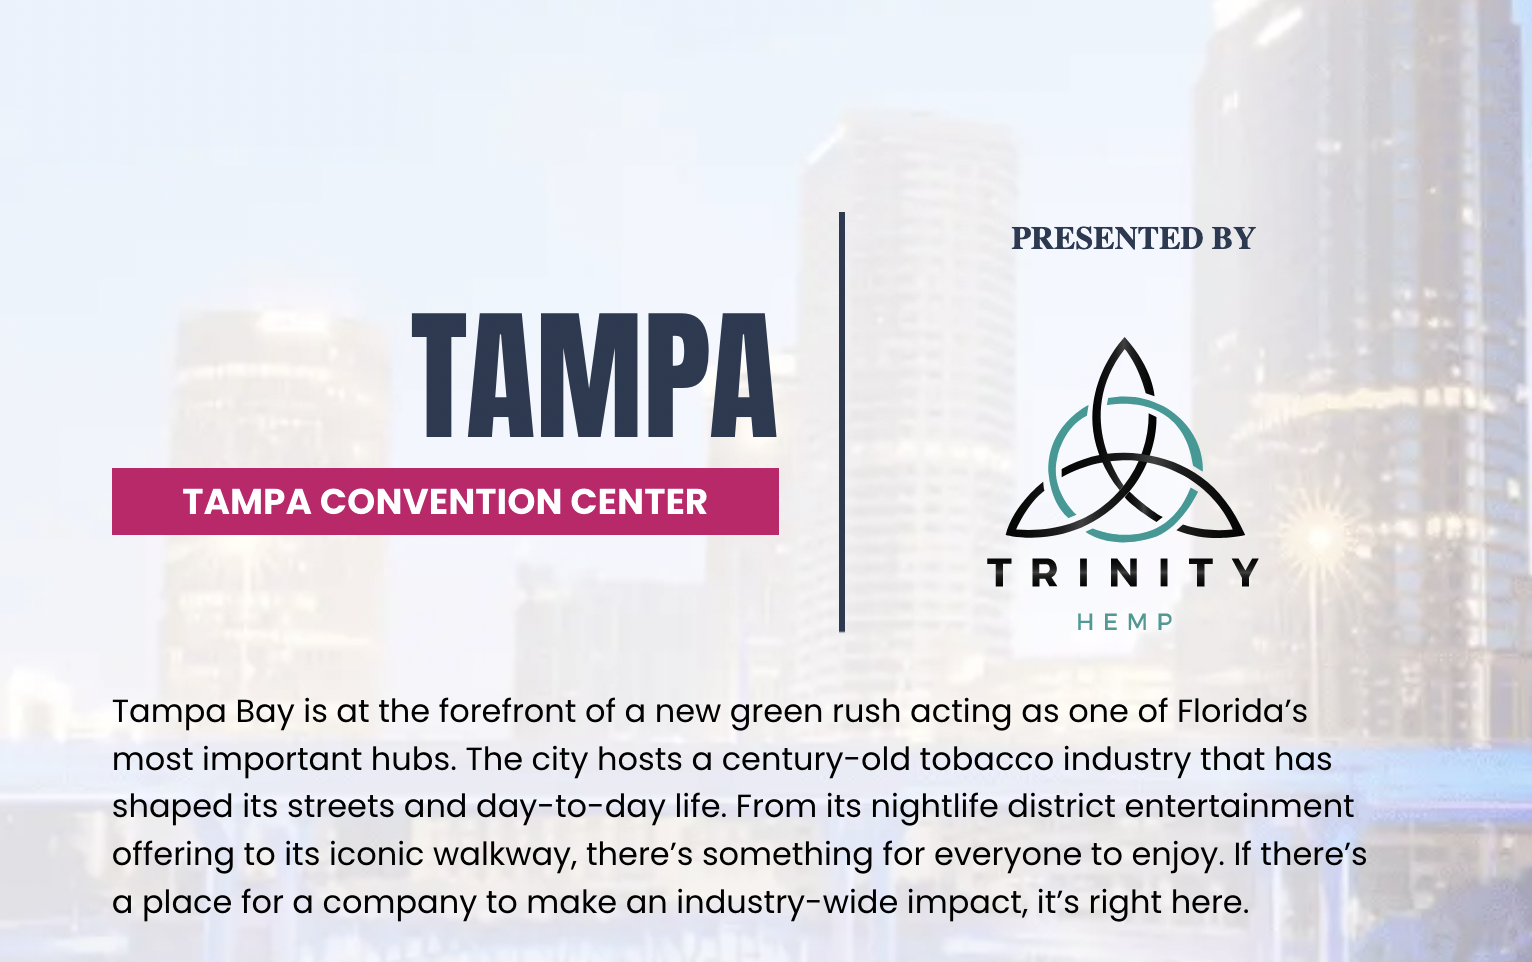 Aromatech USA to Exhibit in Tampa, Florida